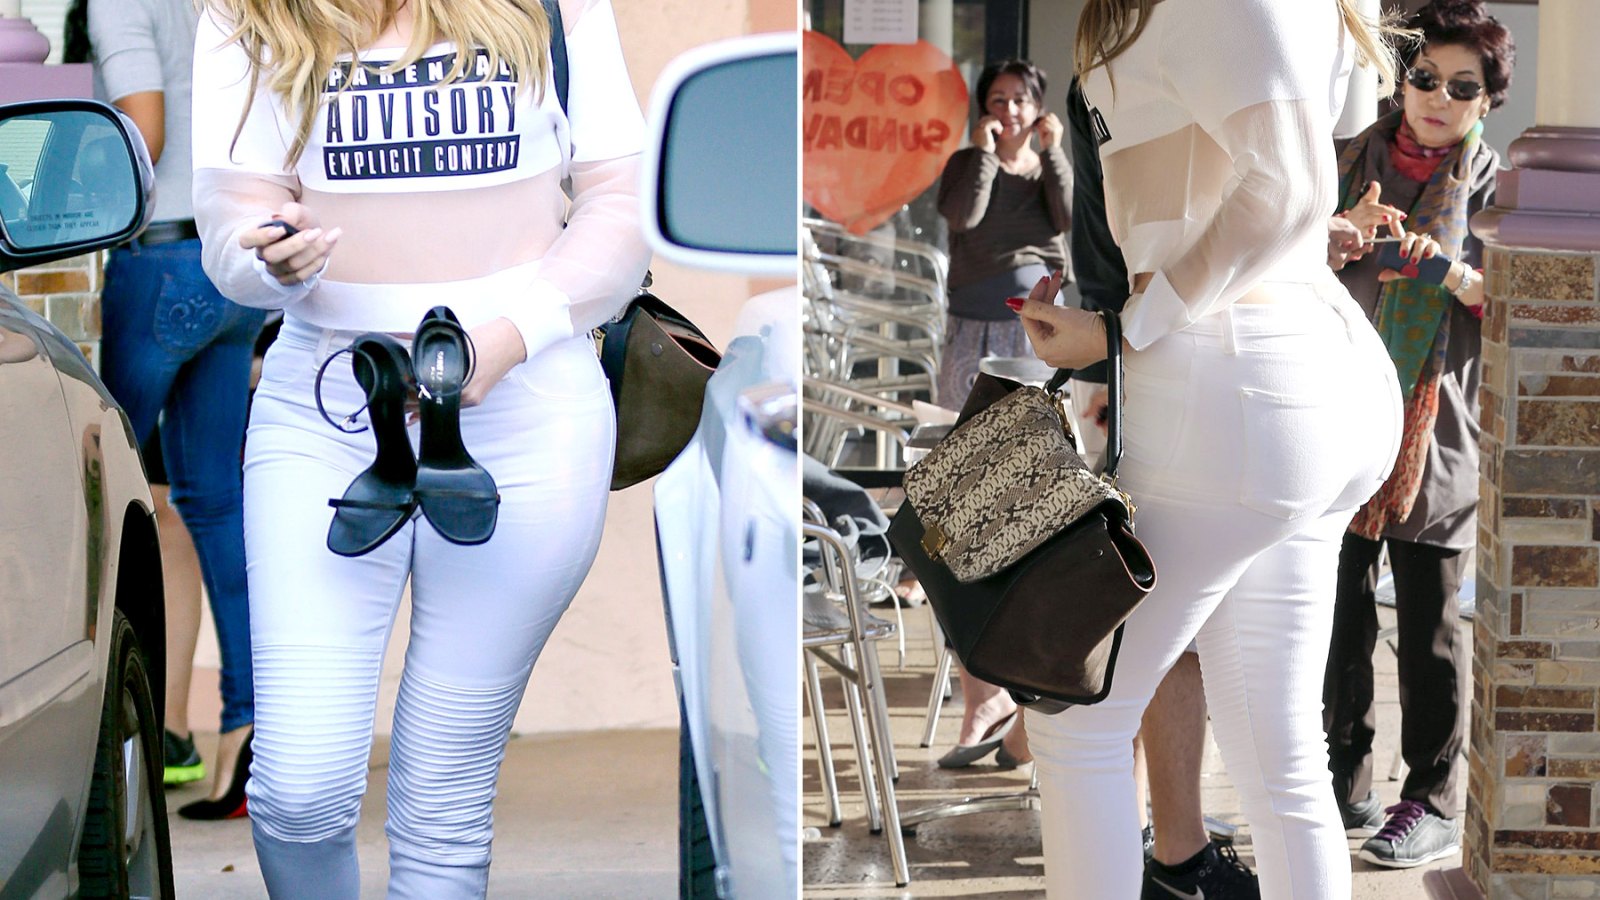 Khloe Kardashian gets her nails done on March 20, 2014